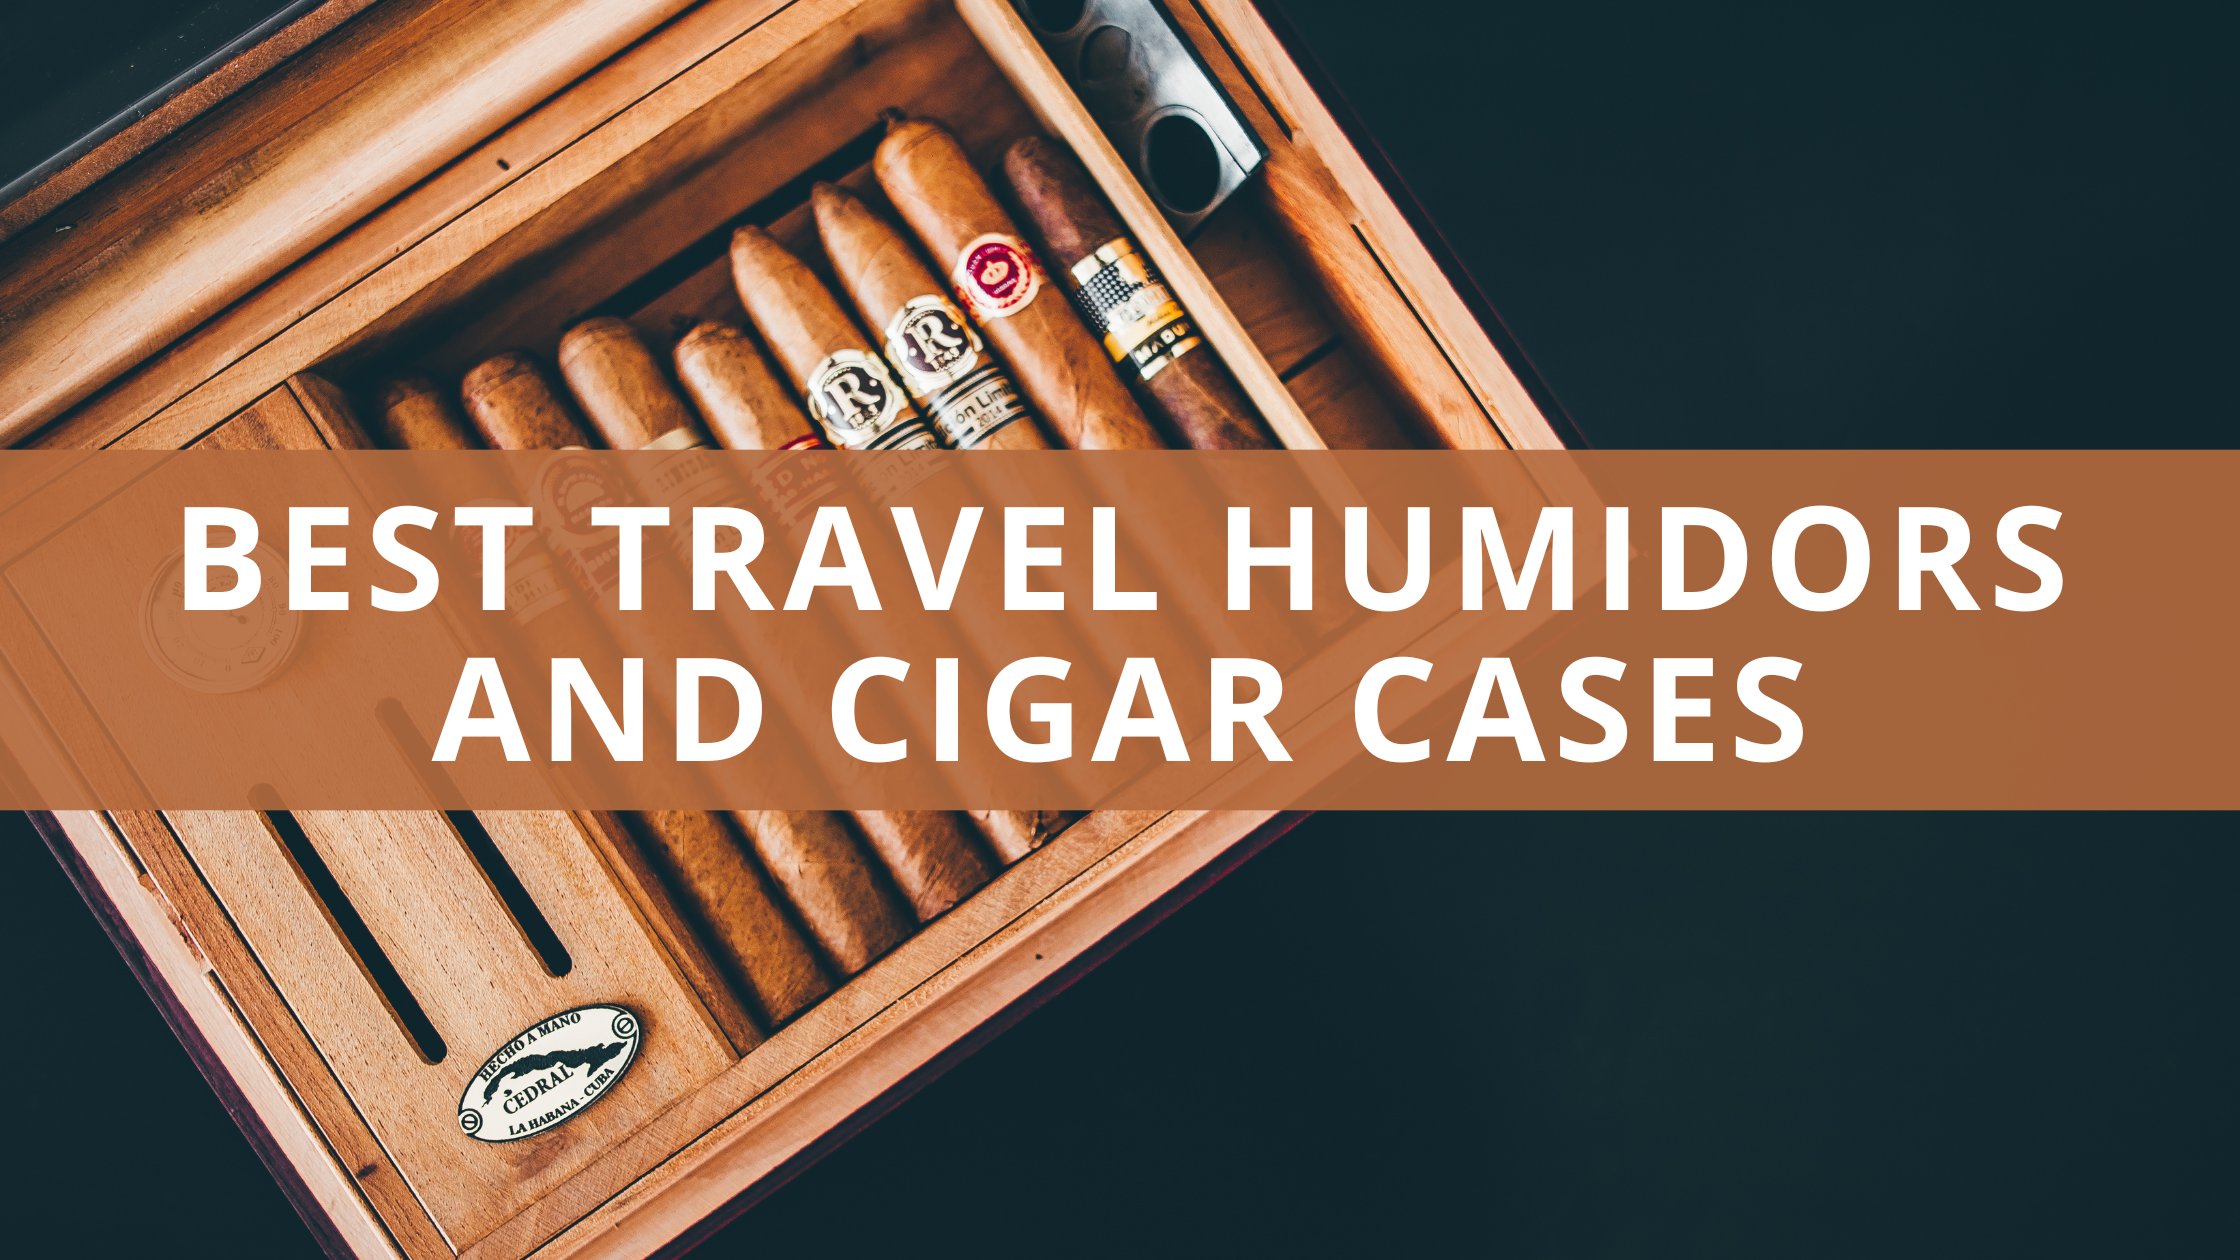 Best Travel Humidors and Cigar Cases